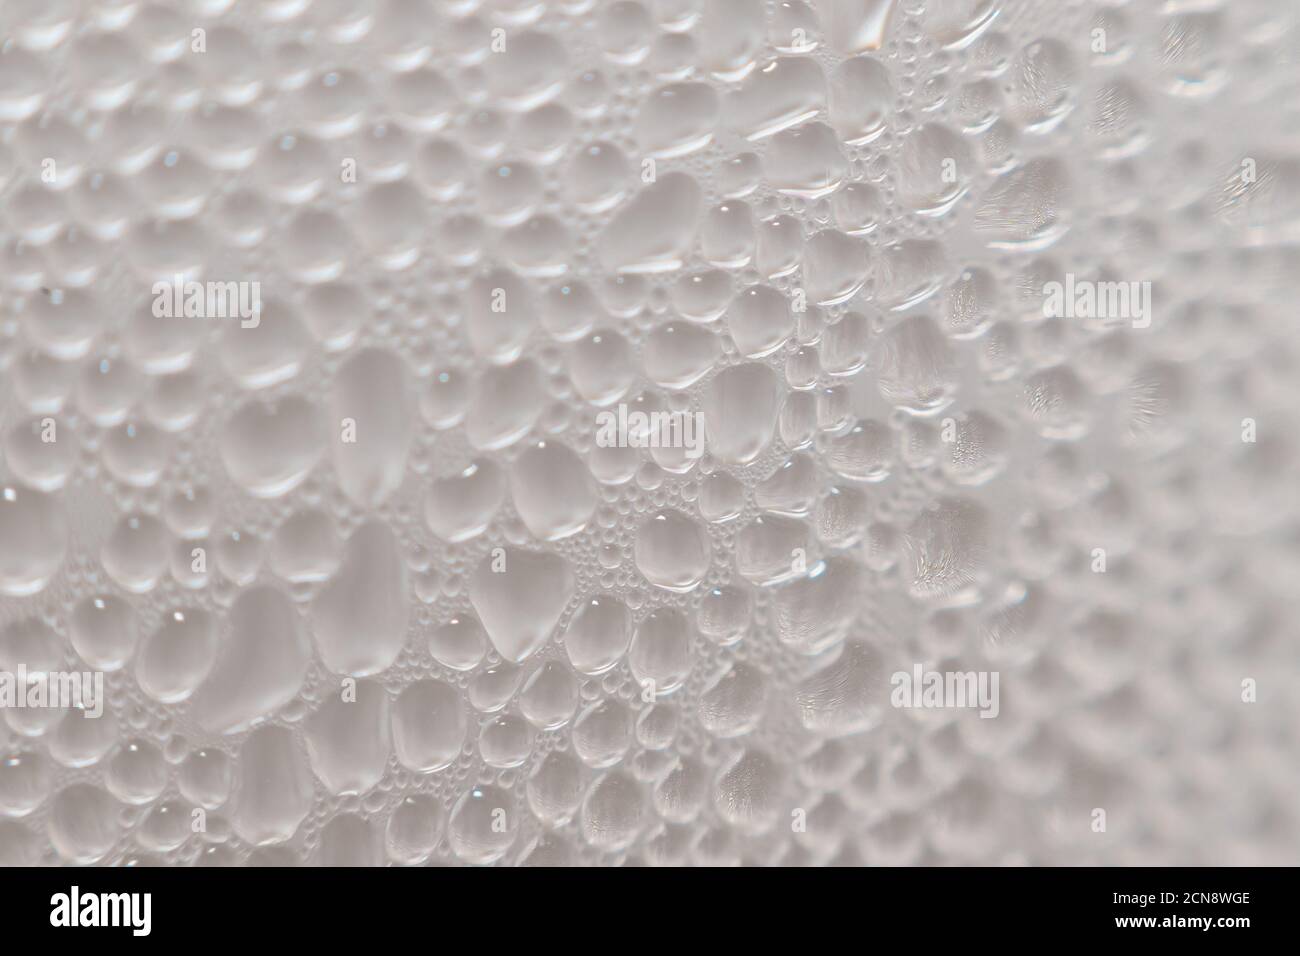 Water drops on the bottles.Water drop background. Macro view. Stock Photo